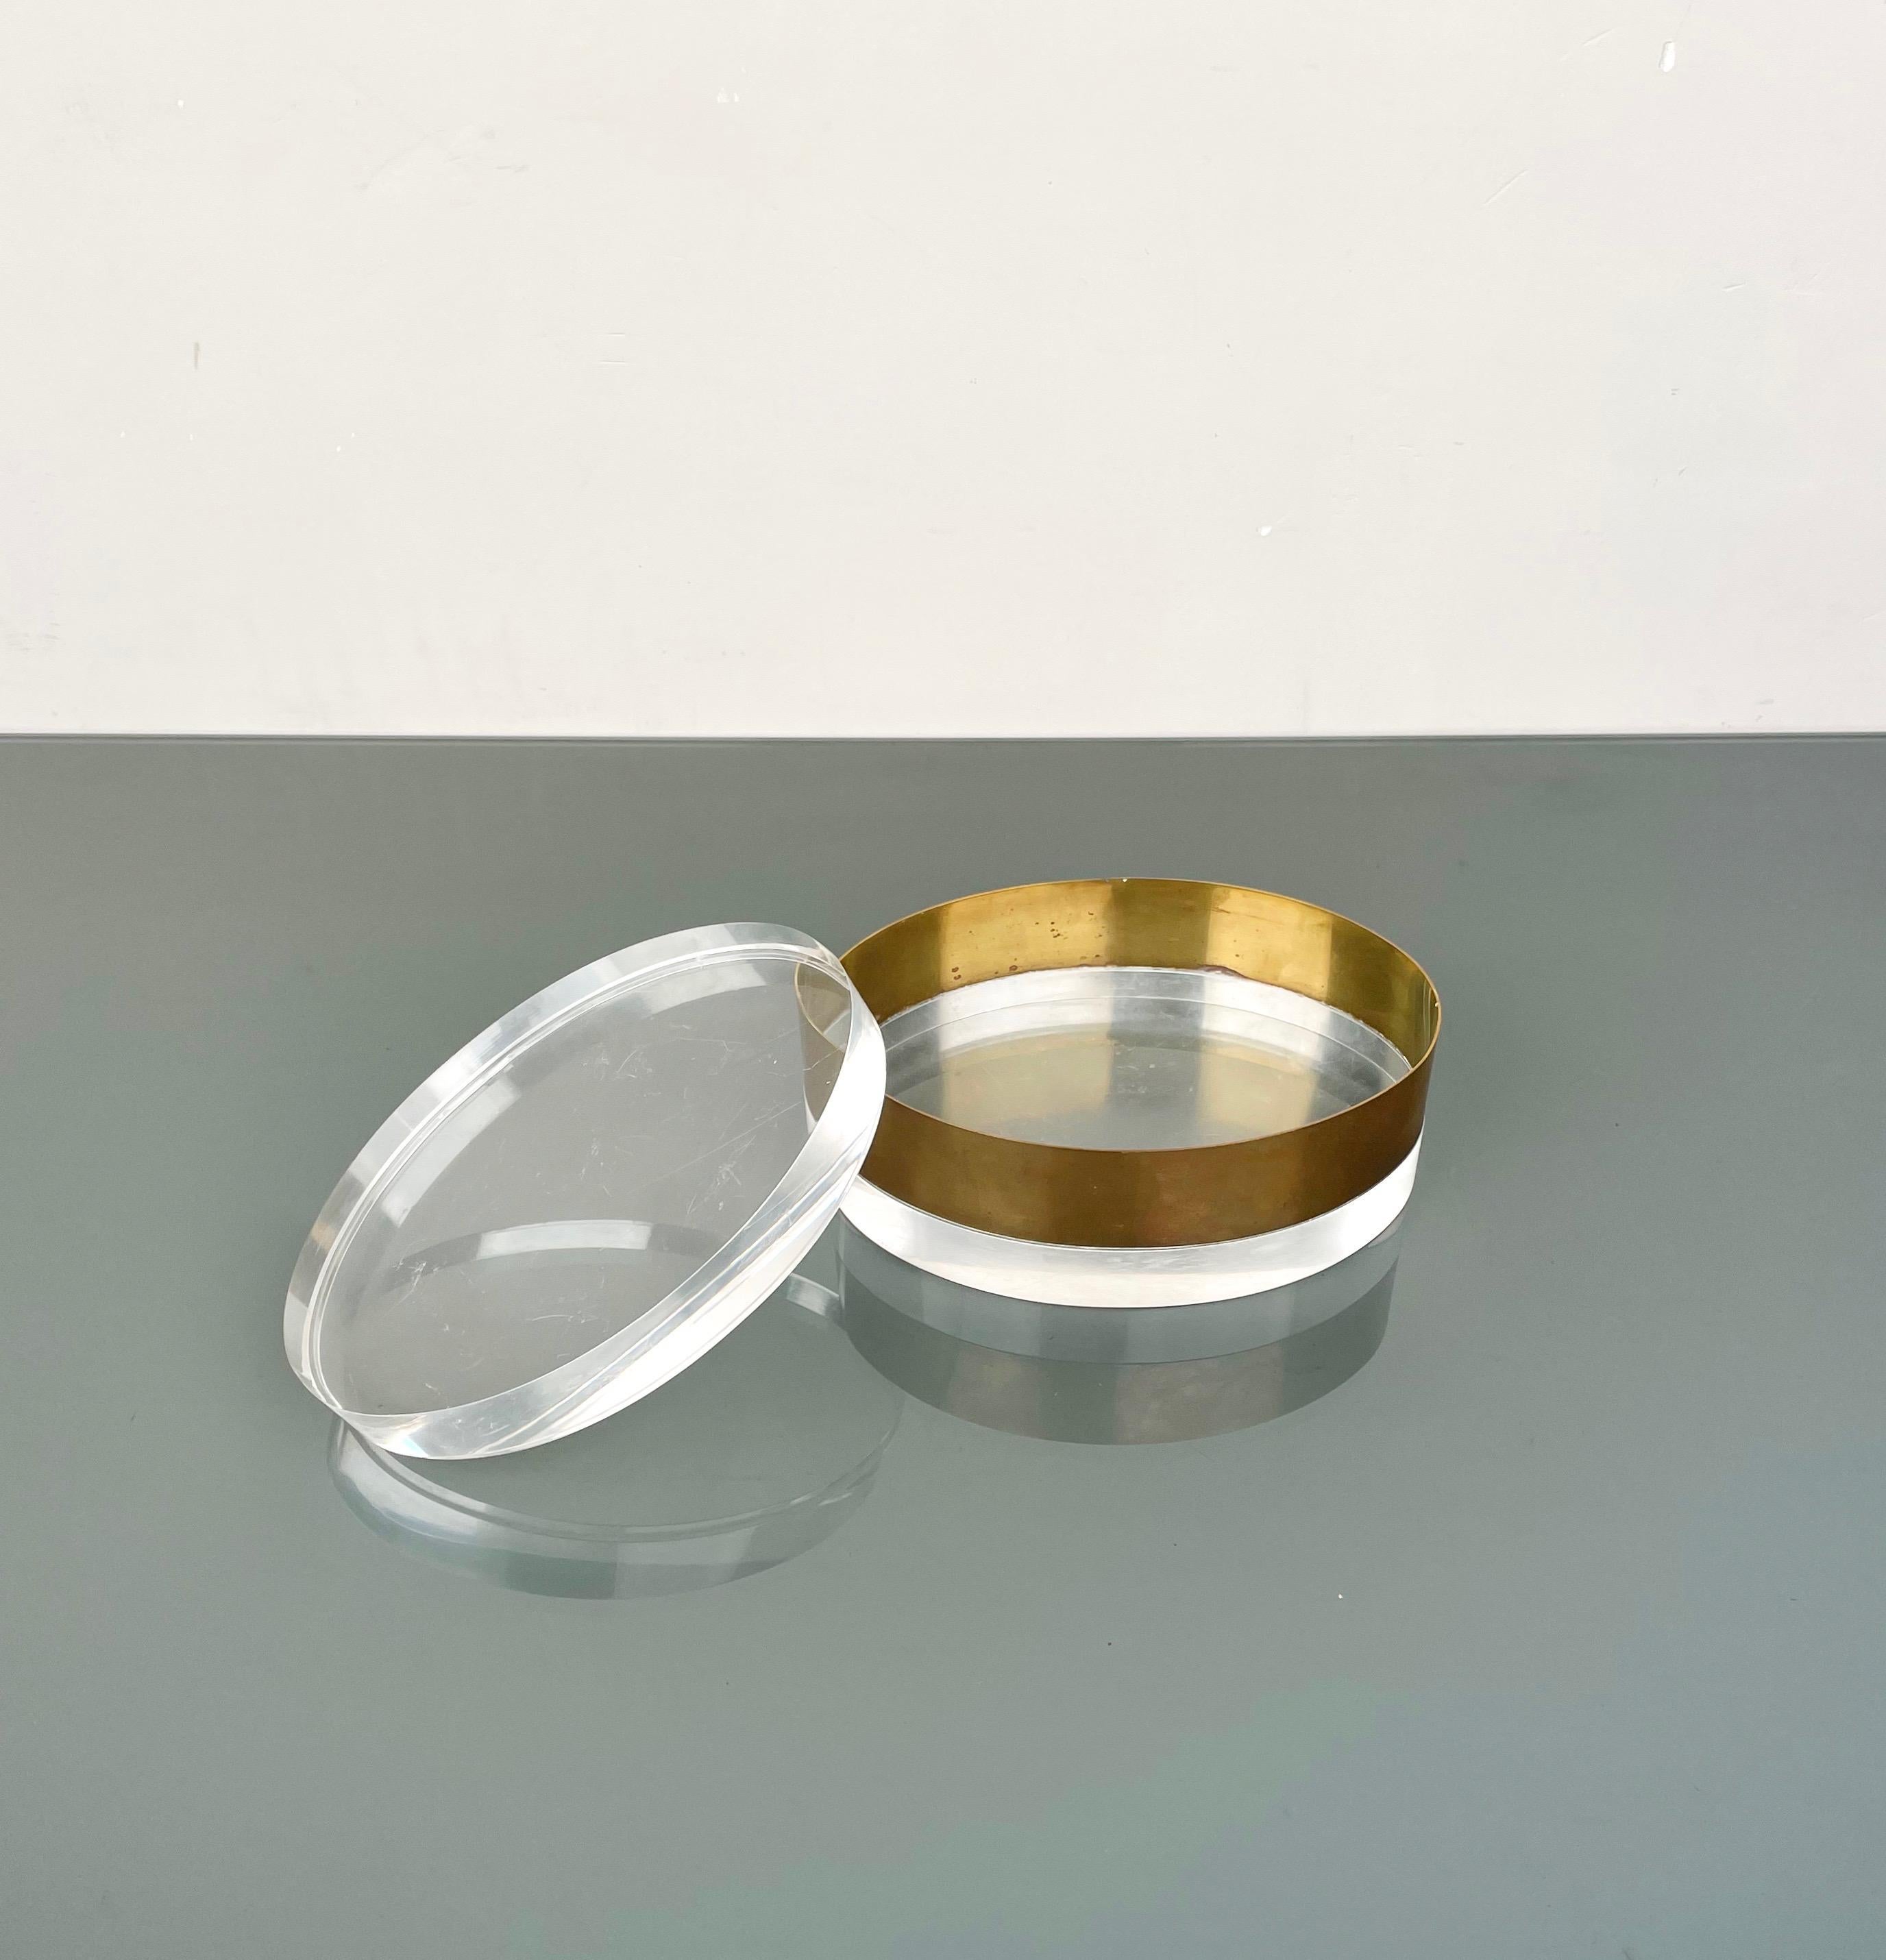 Oval Lucite and Brass Decorative Box, Italy, 1970s For Sale 1